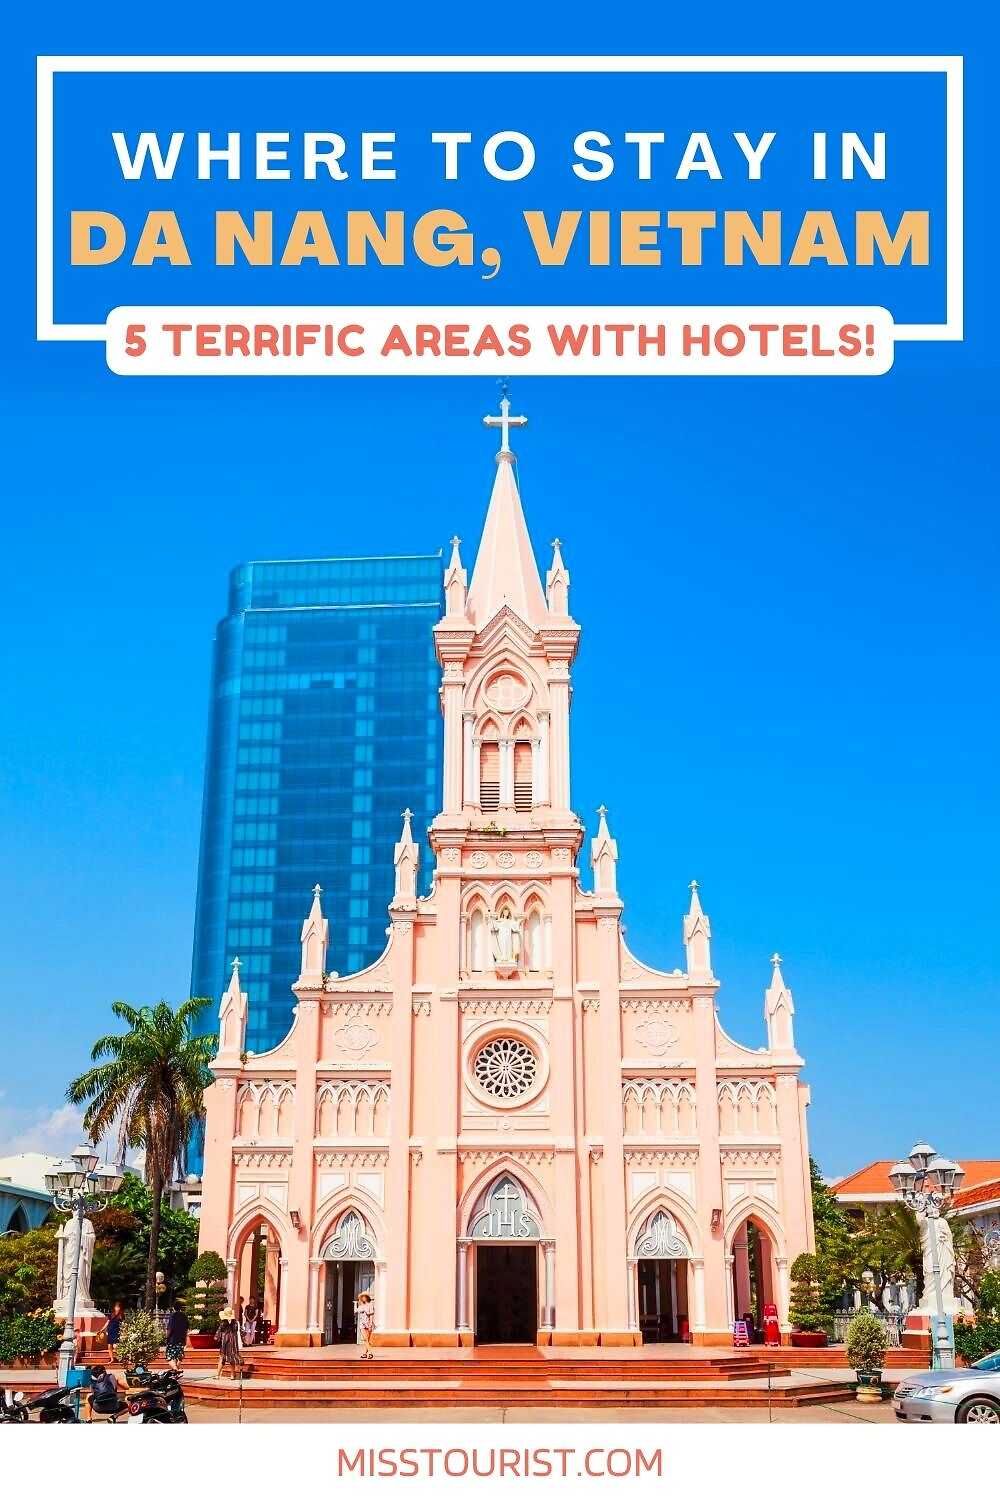 Pink church in Da Nang, Vietnam, with 'Where to stay - 5 areas with hotels